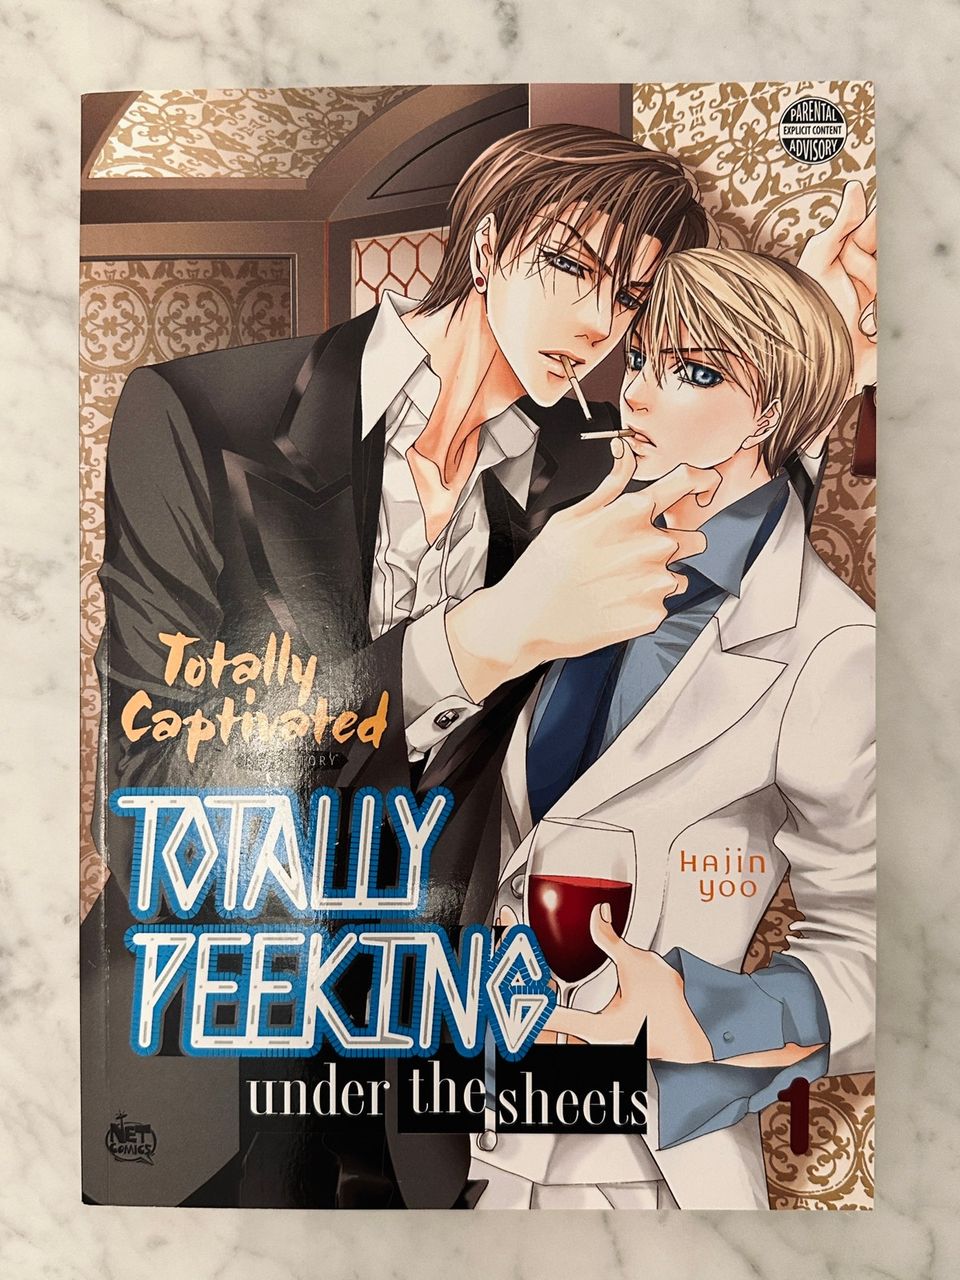 Totally Captivated Side Story: Totally Peeking Under the Sheets Vol. 1 (manhwa)